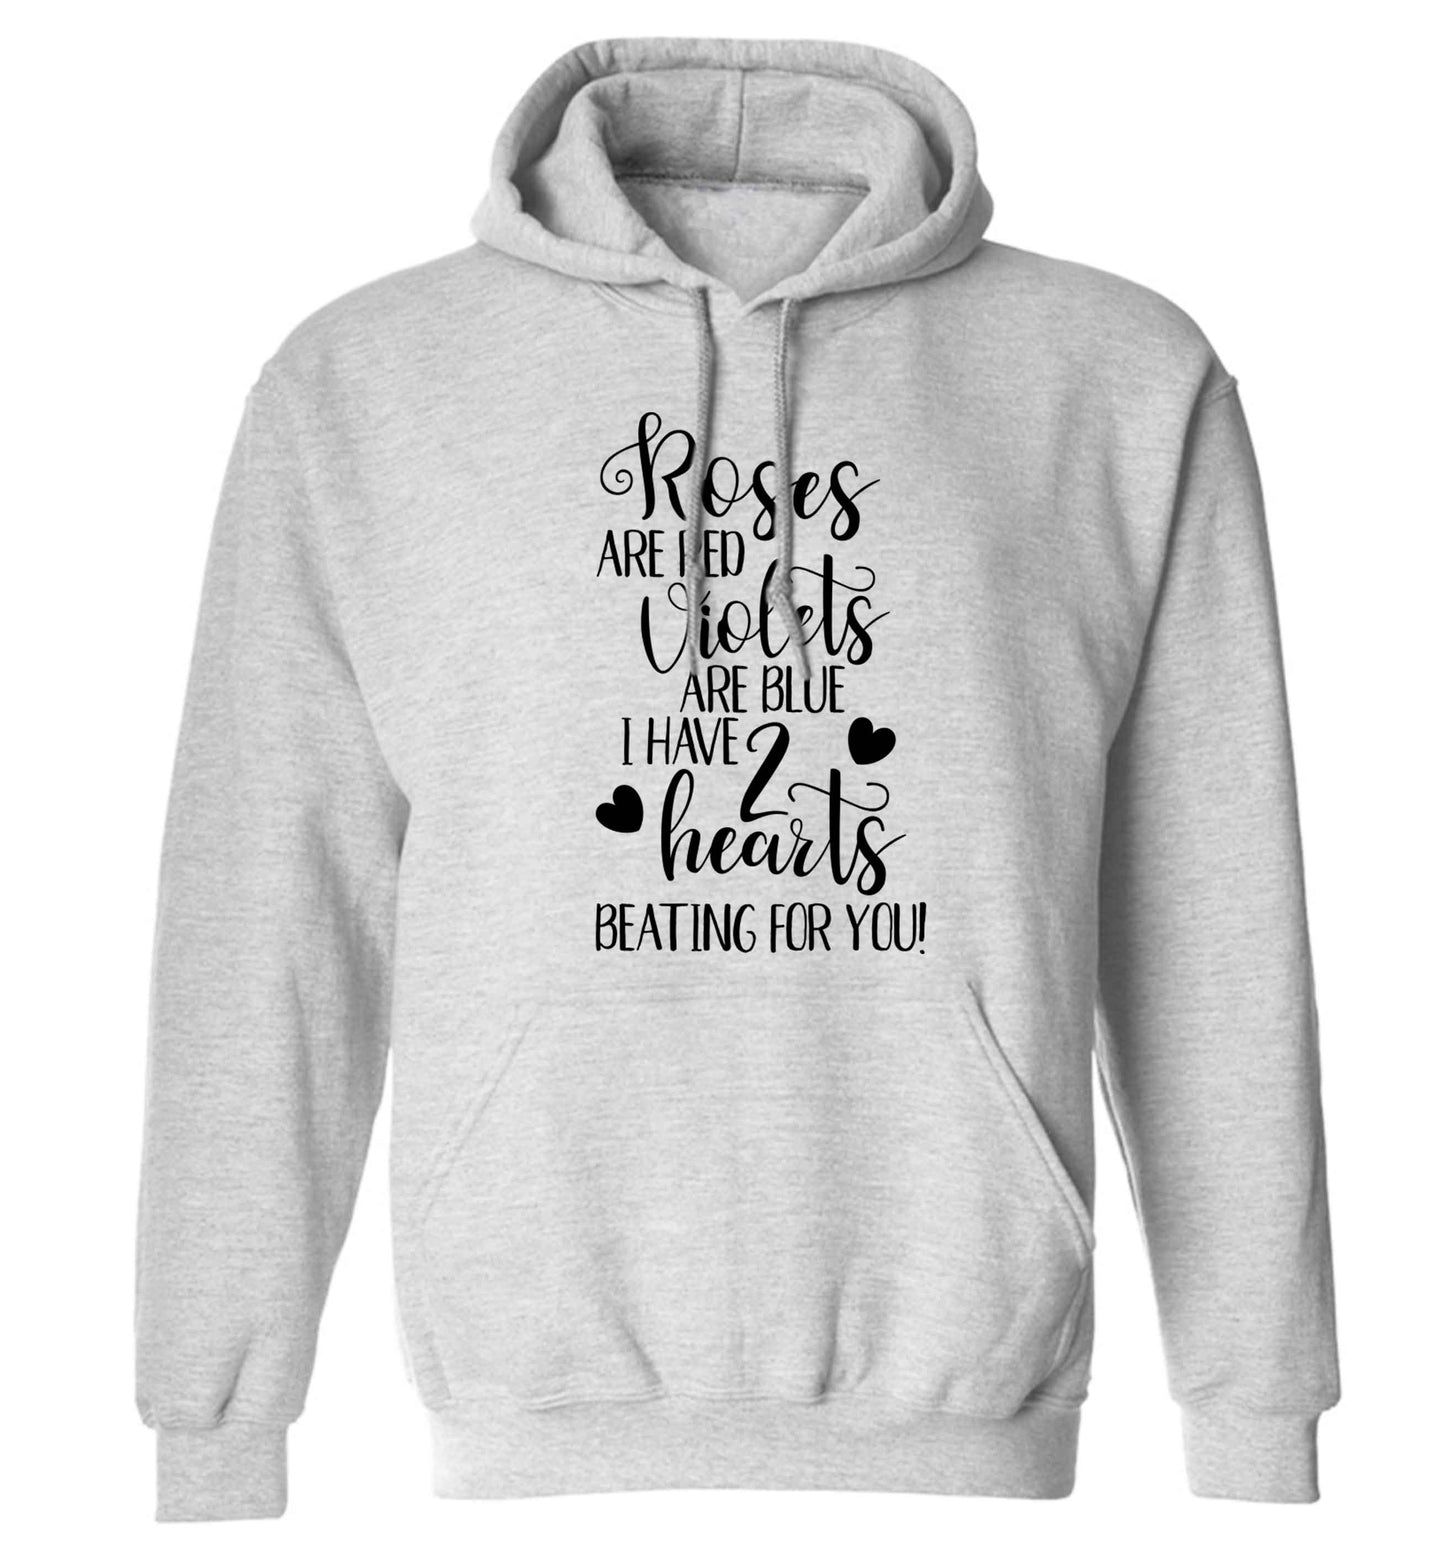 Roses are red violets are blue I have two hearts beating for you adults unisex grey hoodie 2XL